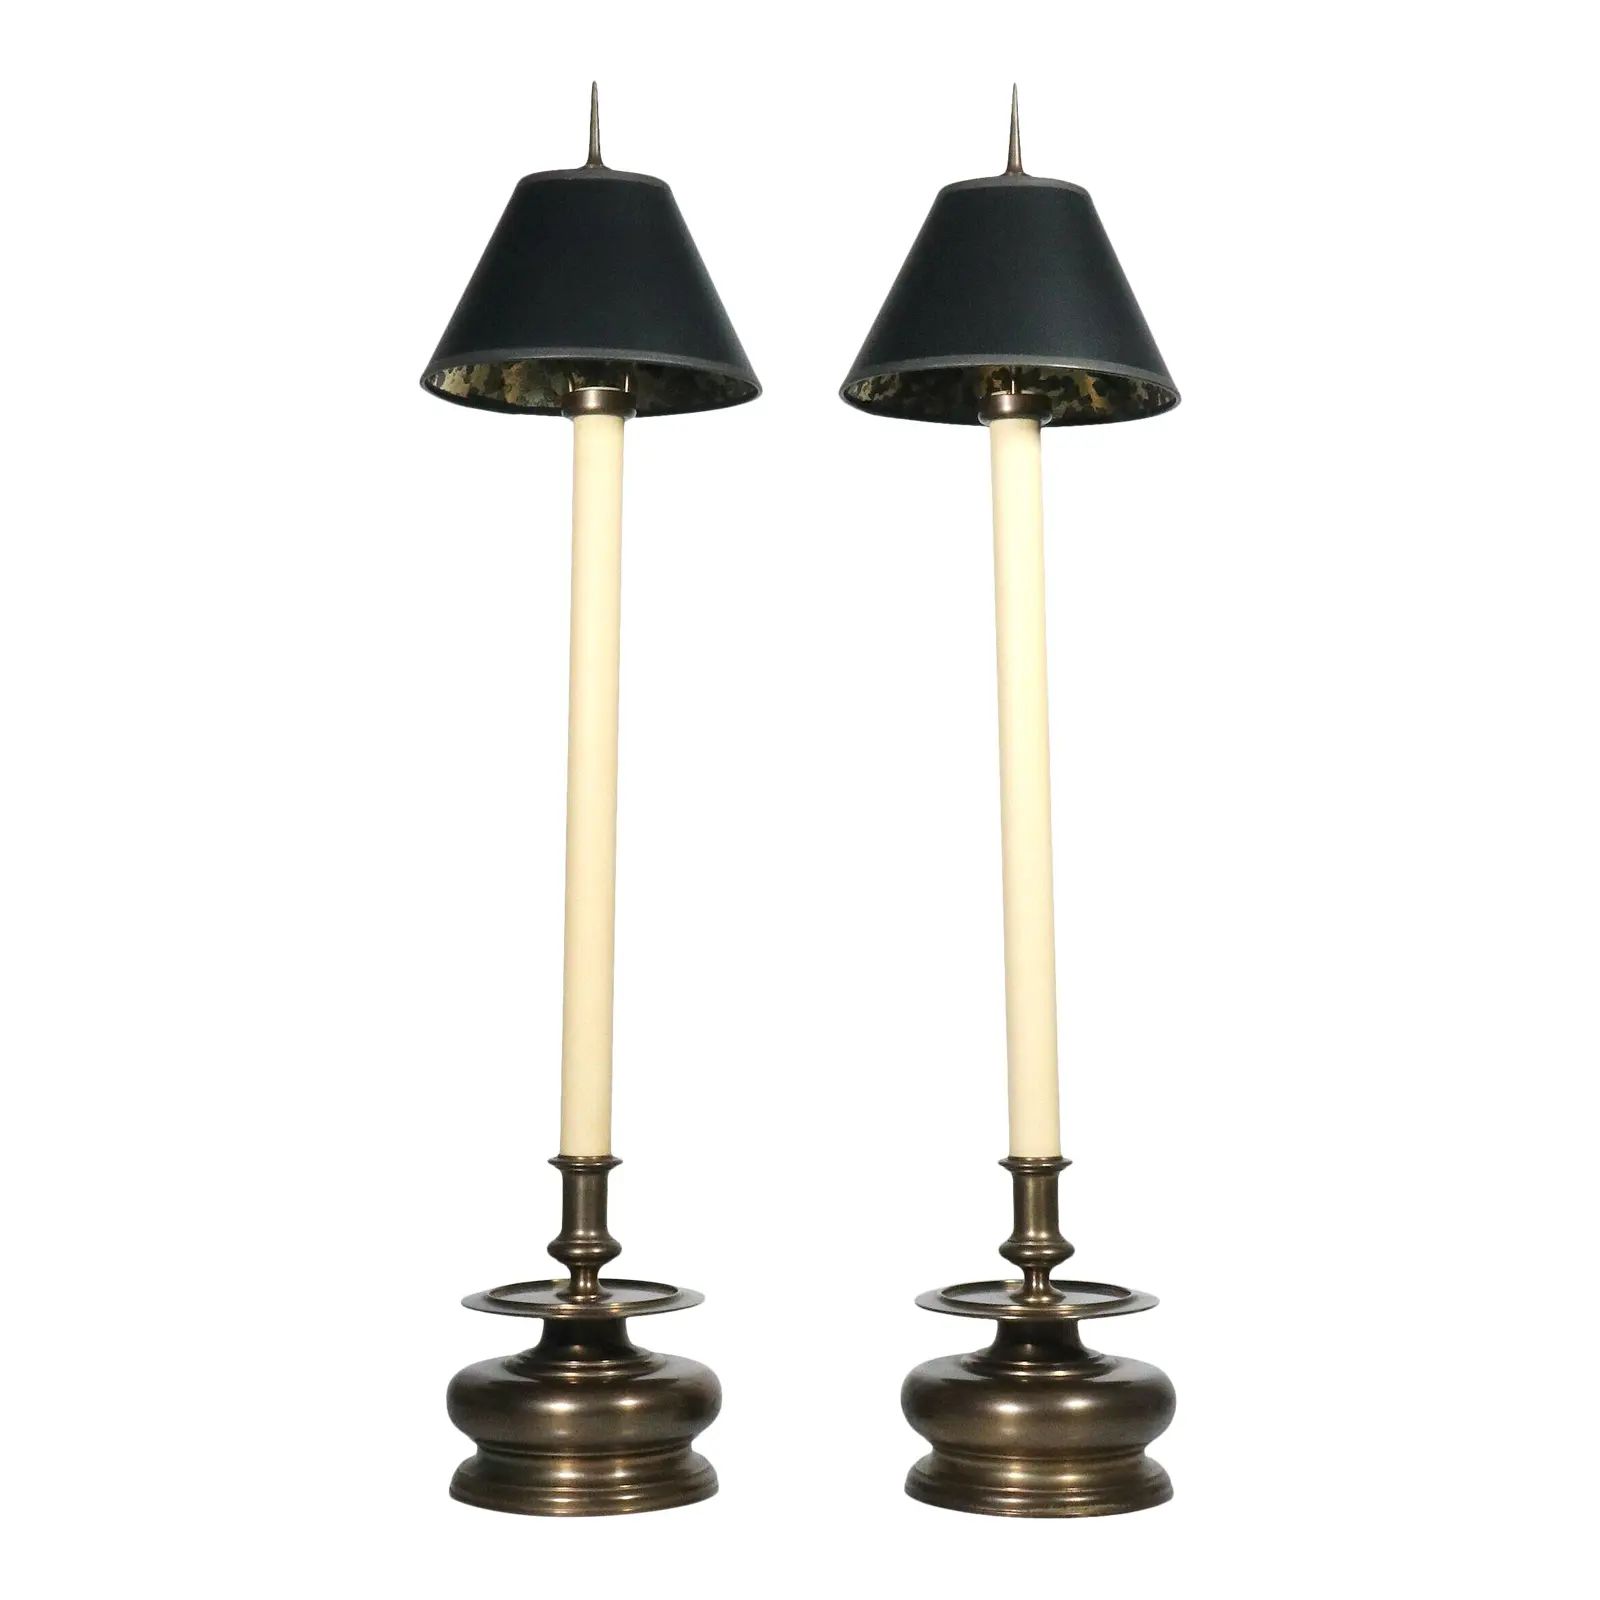 1970s Chapman Brass Buffet Candlestick Lamps with Black & Gold Foil Shades - A Pair | Chairish